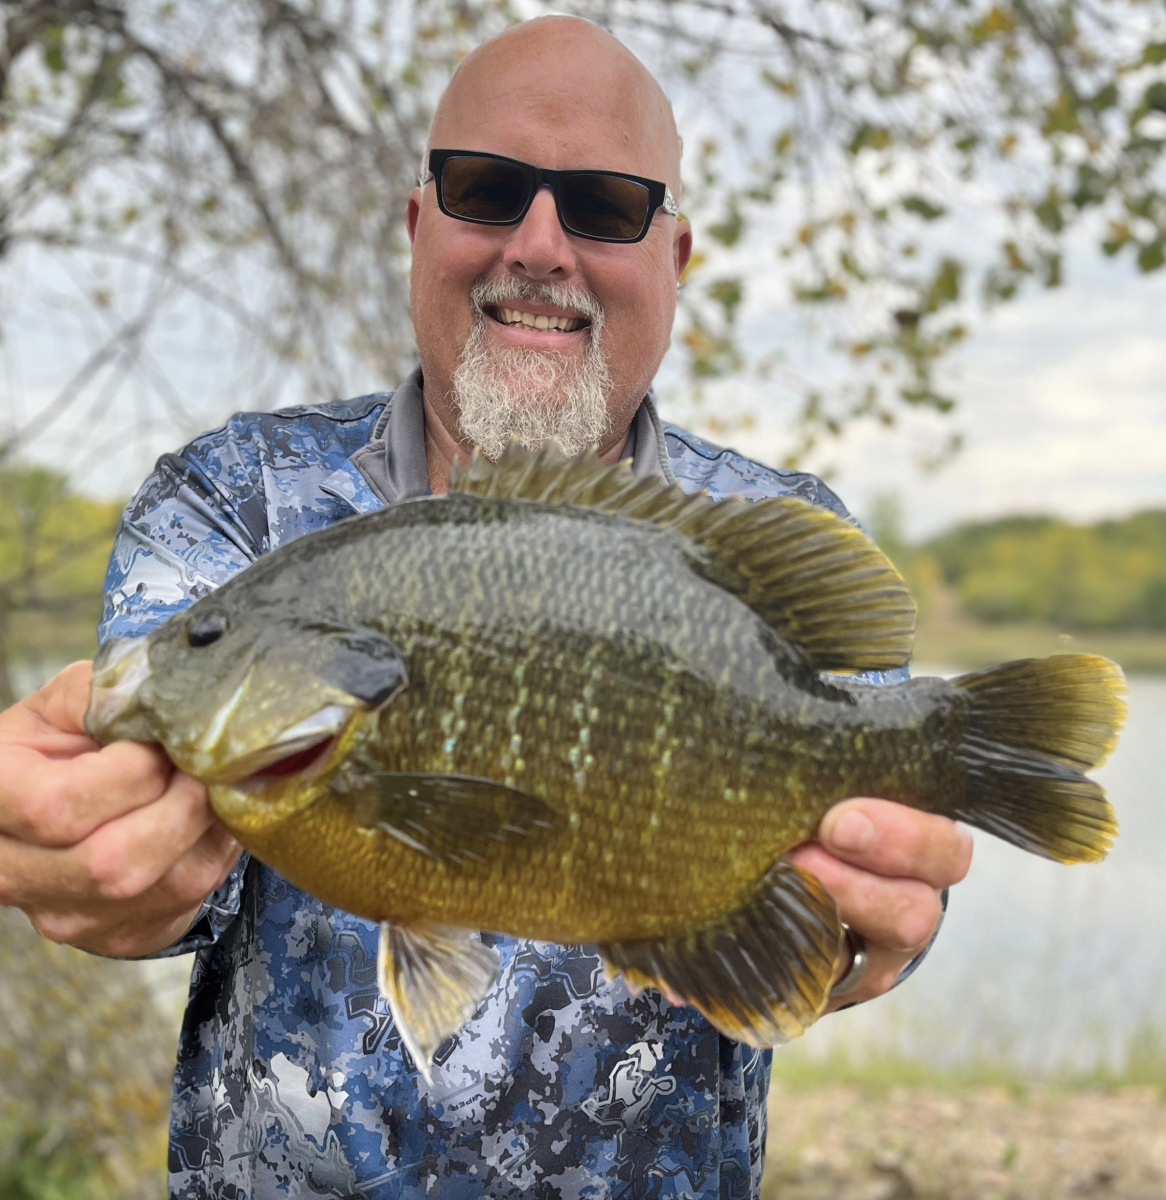 13 lakes in Otter Tail targeted for reduced sunfish limits, News